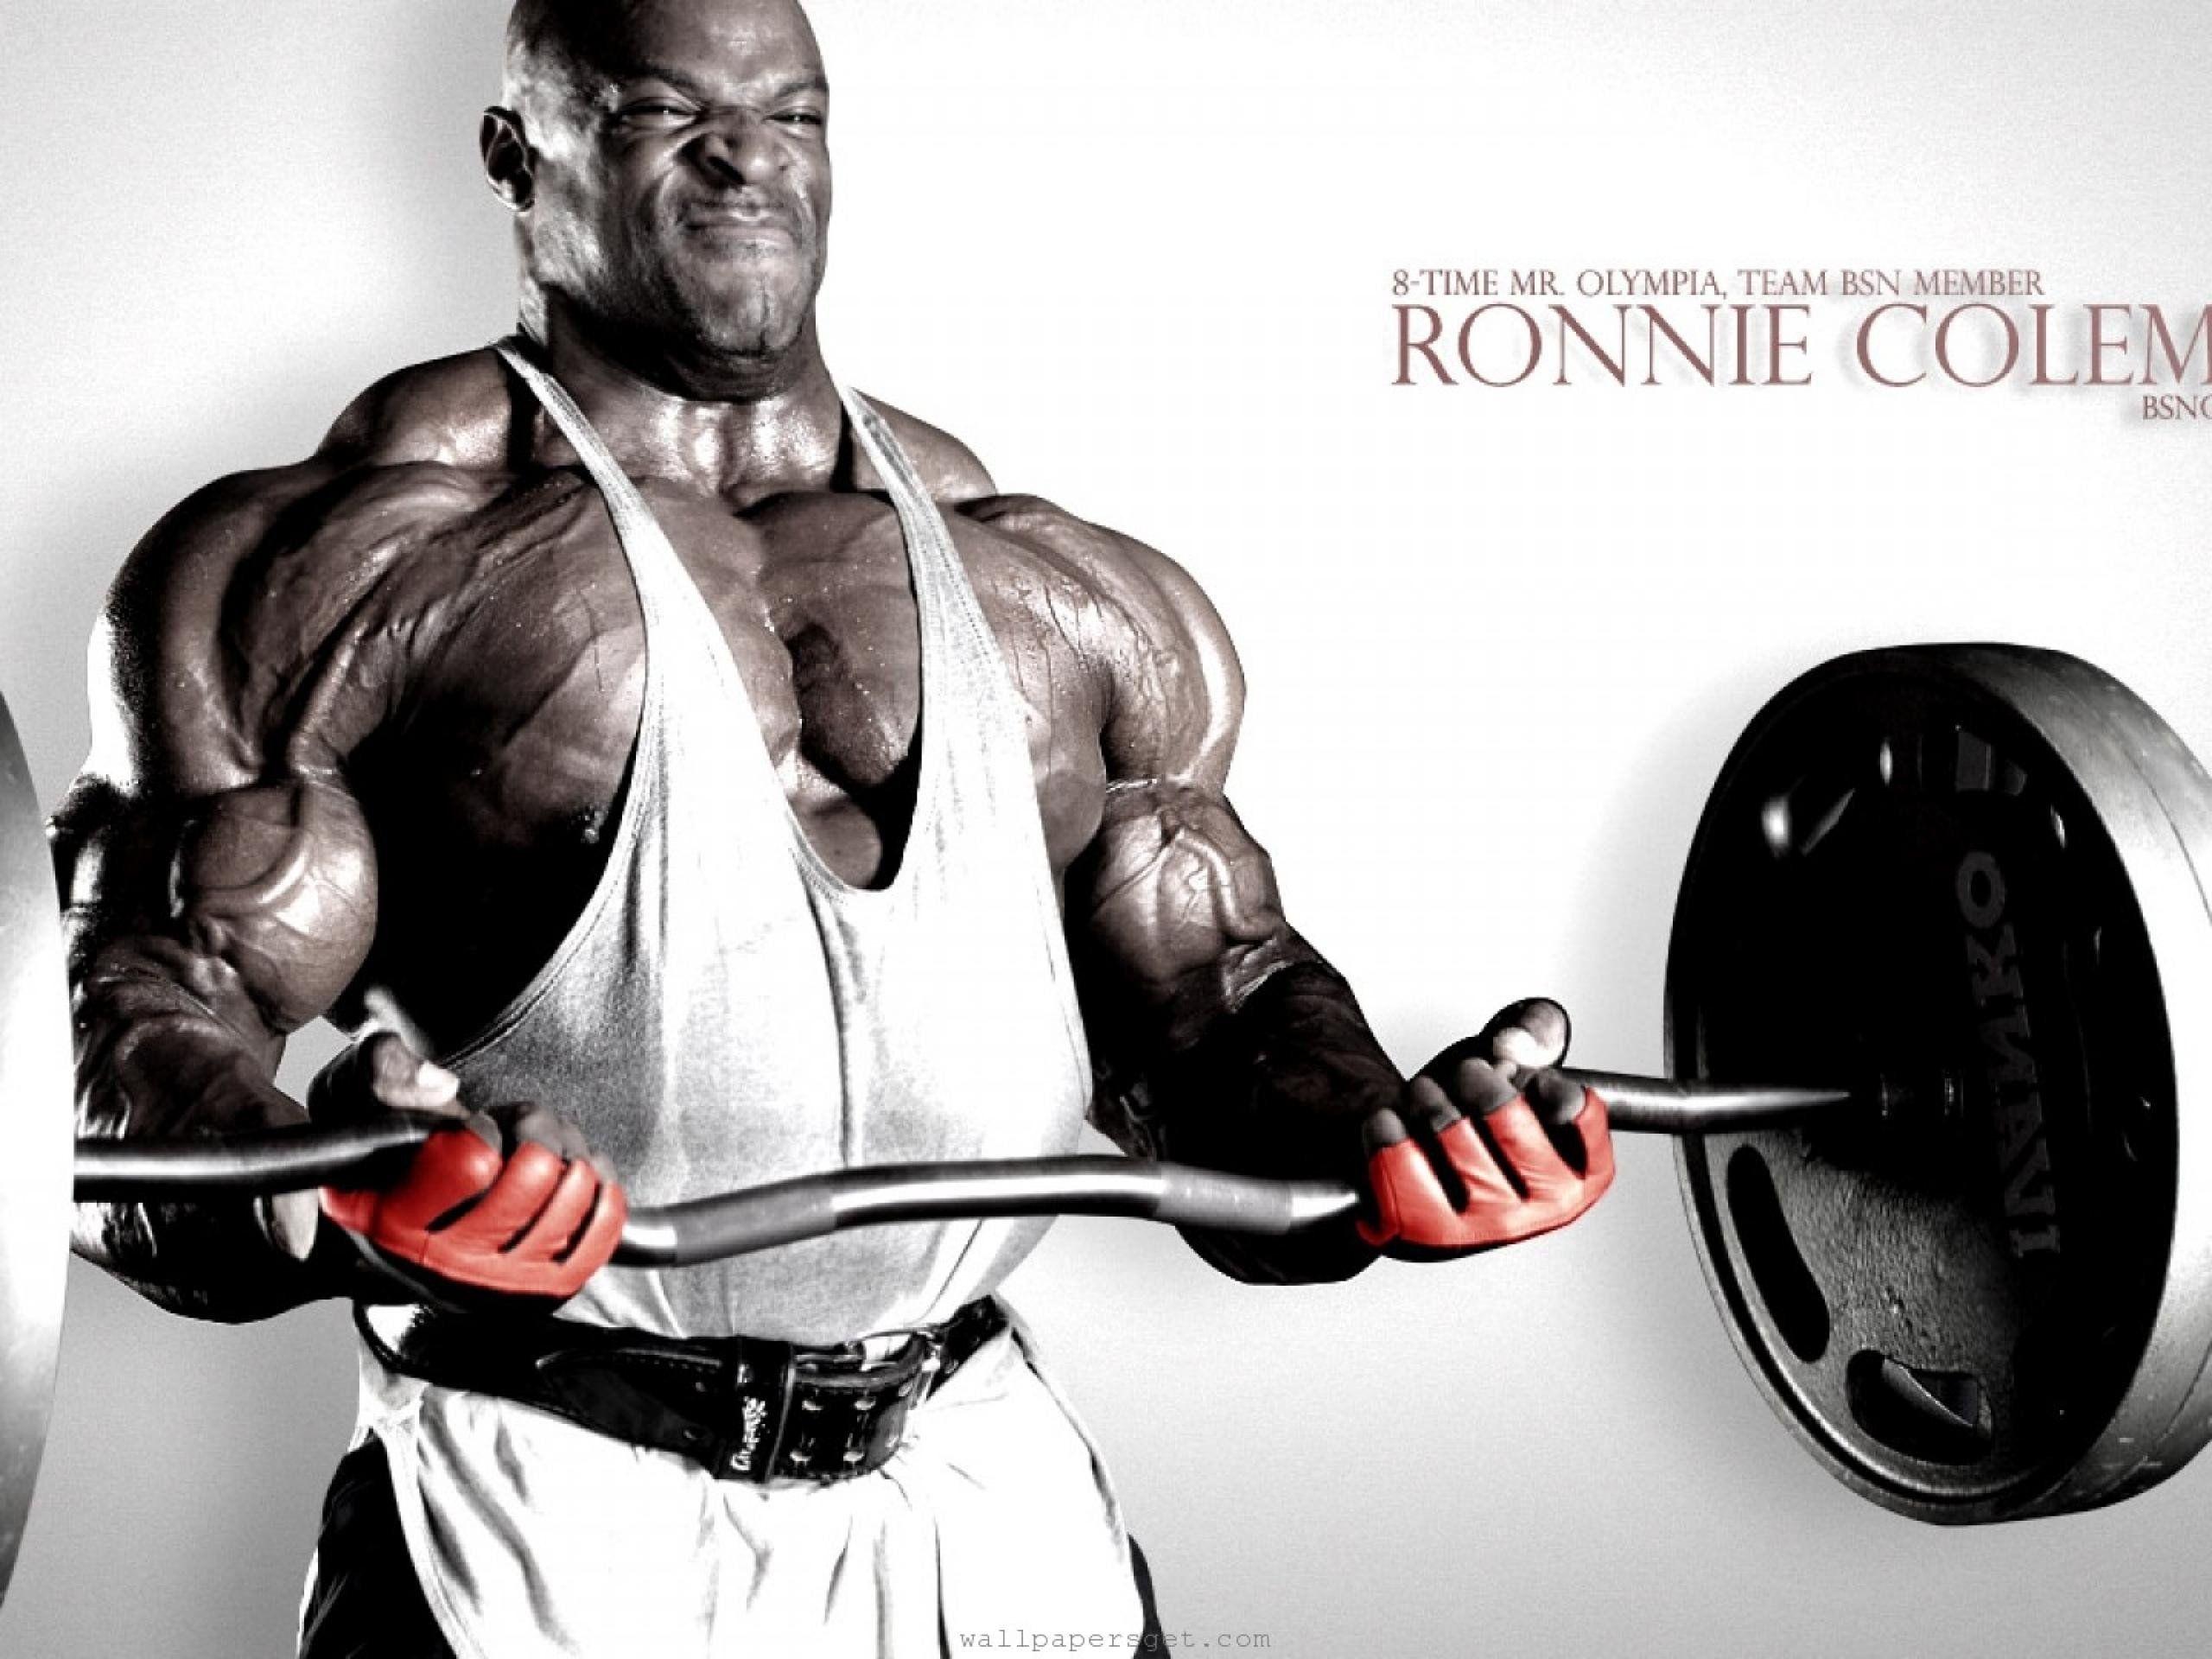 Ronnie Coleman Wallpaper HD × Ronnie Coleman Wallpaper. Fitness